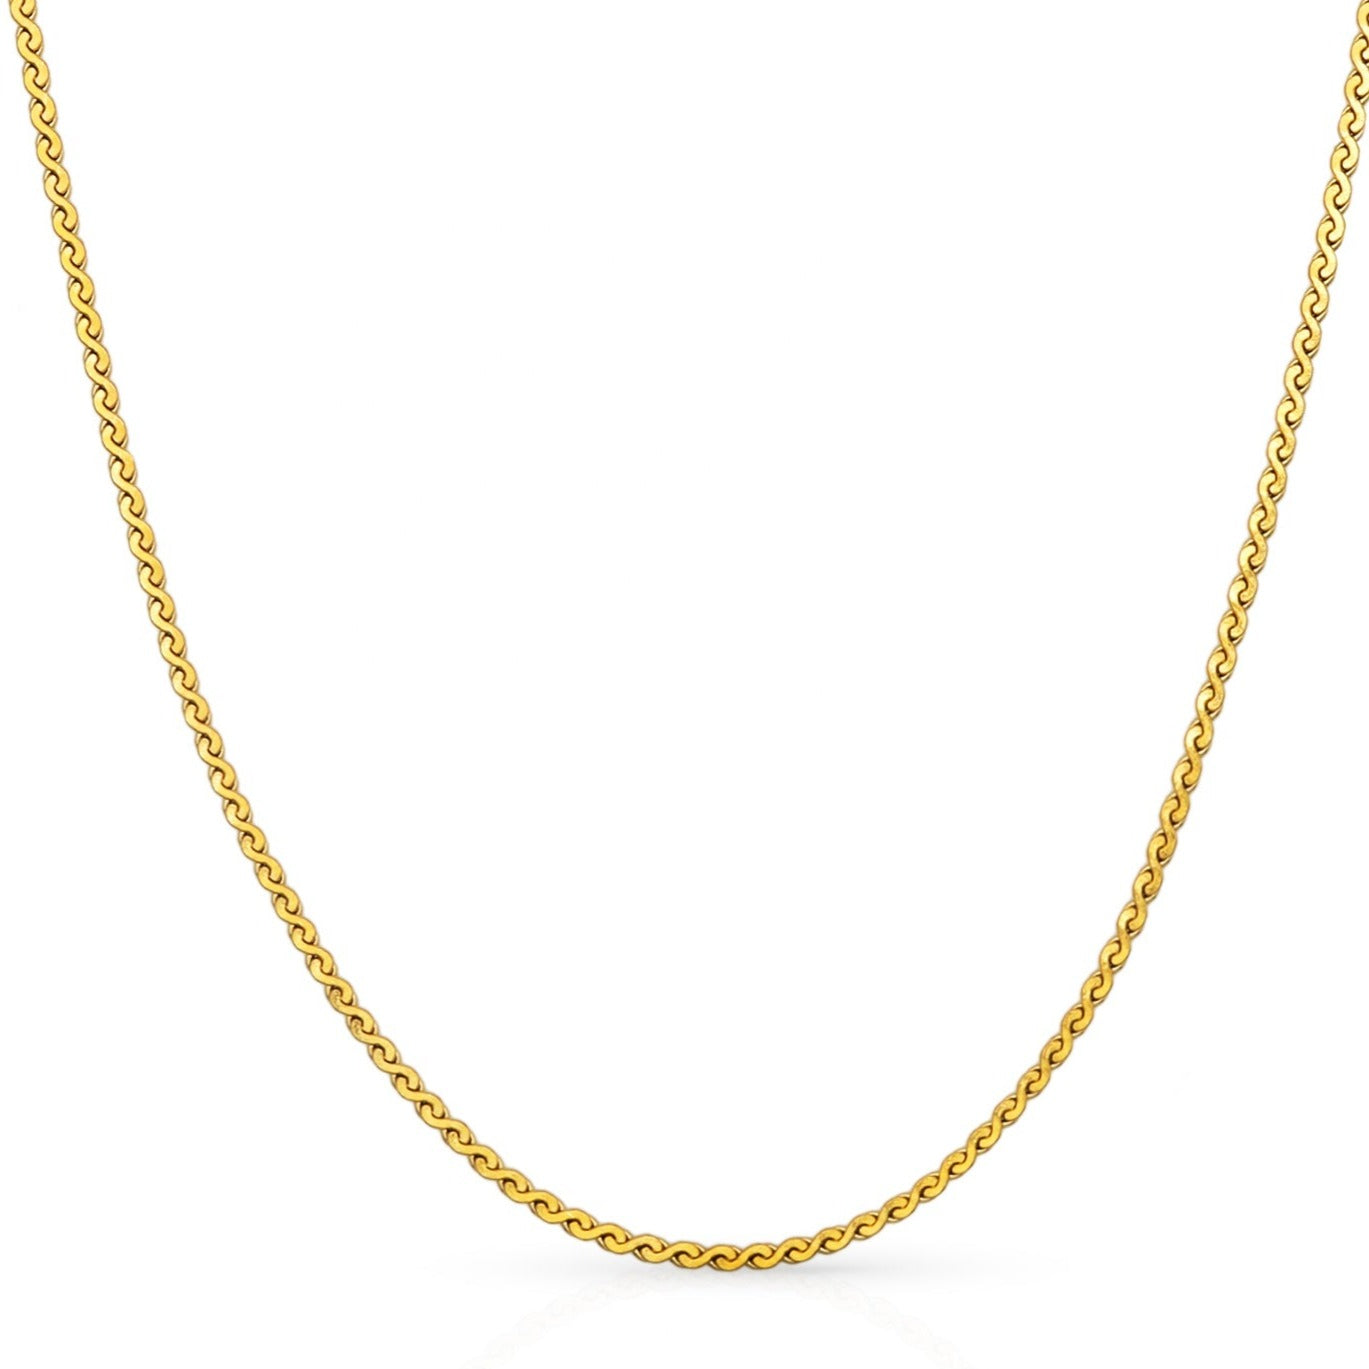 Adeline Chain Necklace